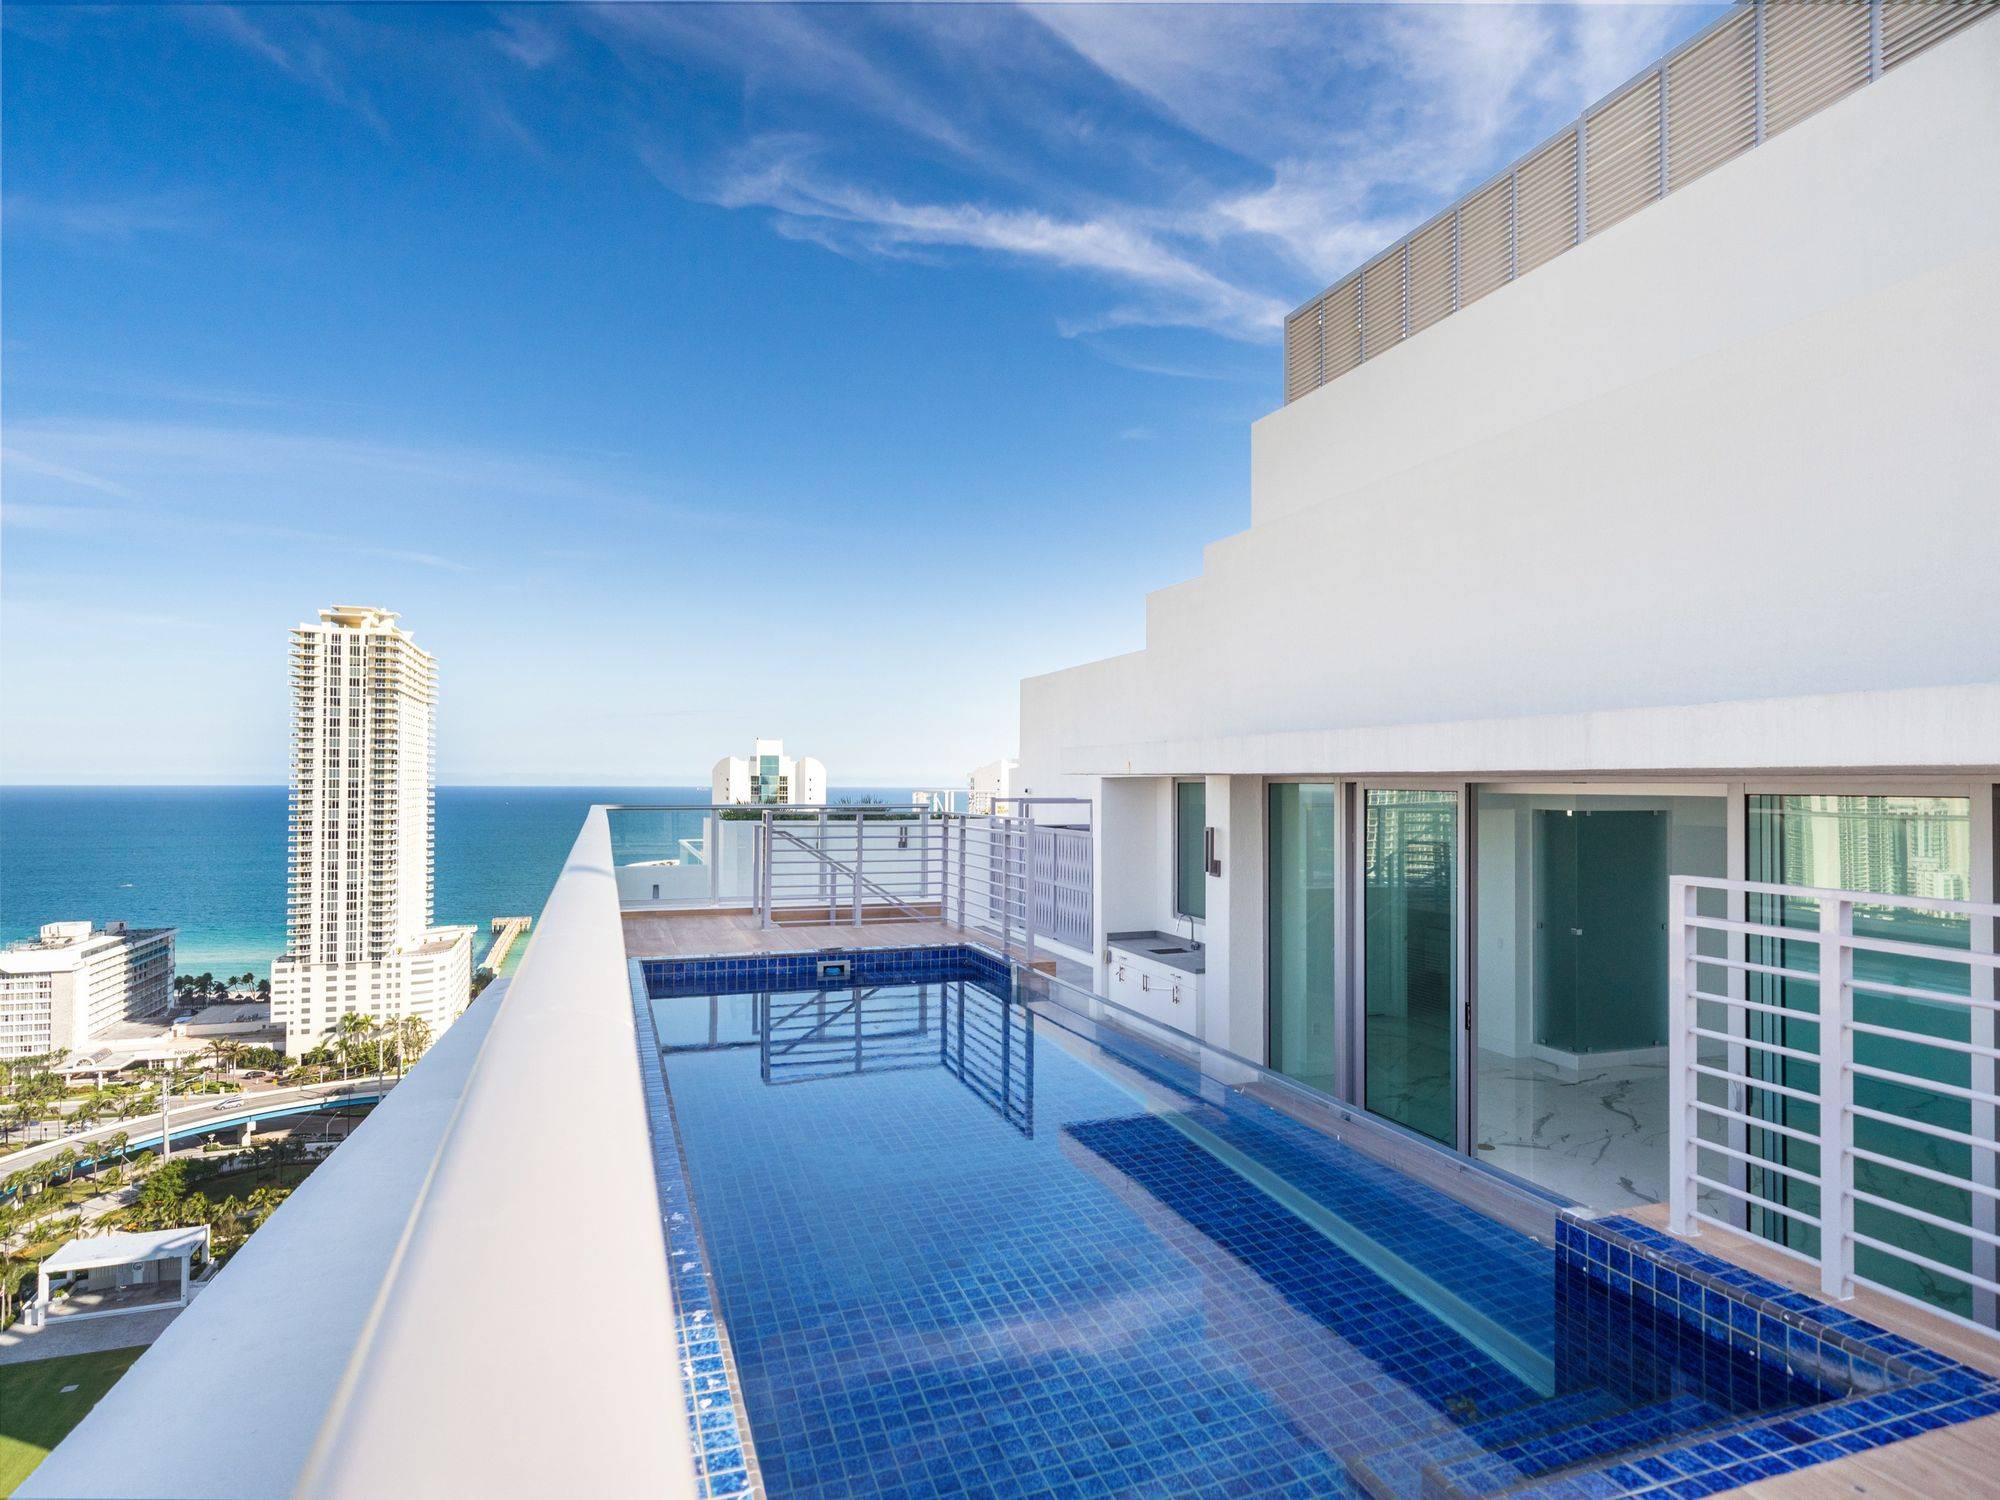 LUXURY PENTHOUSE / BEACH  DUPLEX WITH PRIVATE POOL AND OCEAN VIEW IN SUNNY ISLES, MIAMI